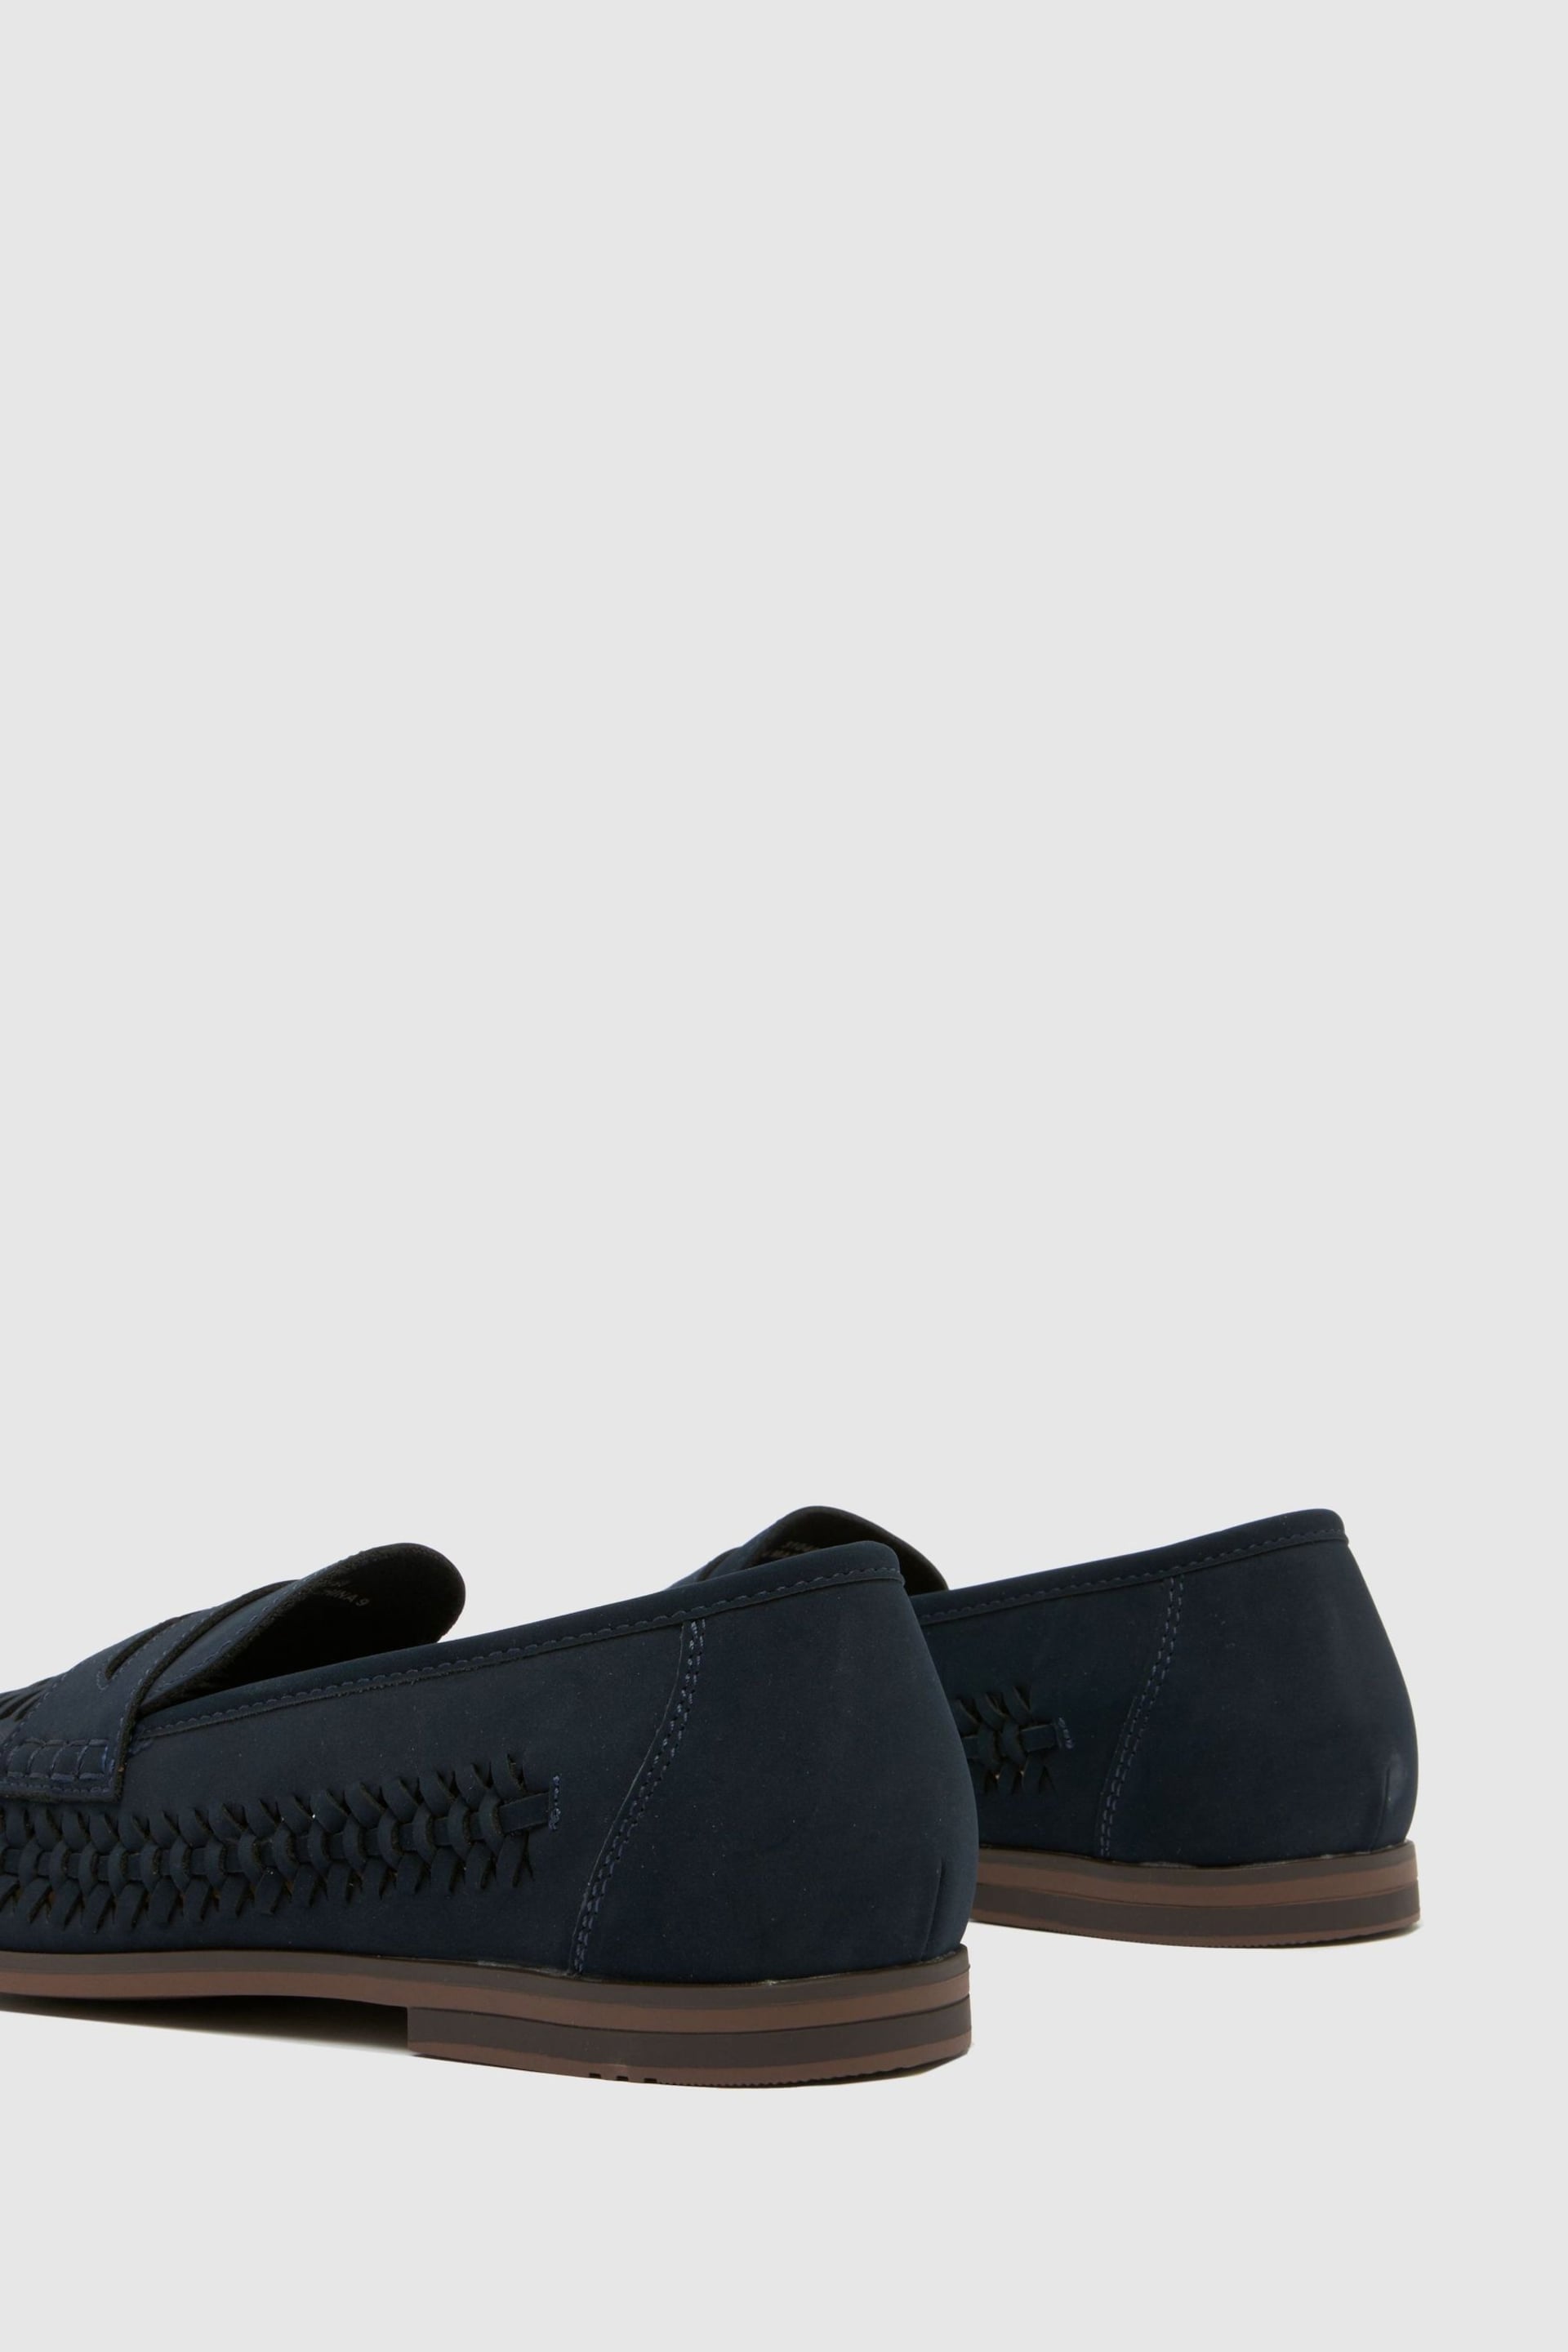 Schuh Blue Reem Woven Loafers - Image 4 of 4